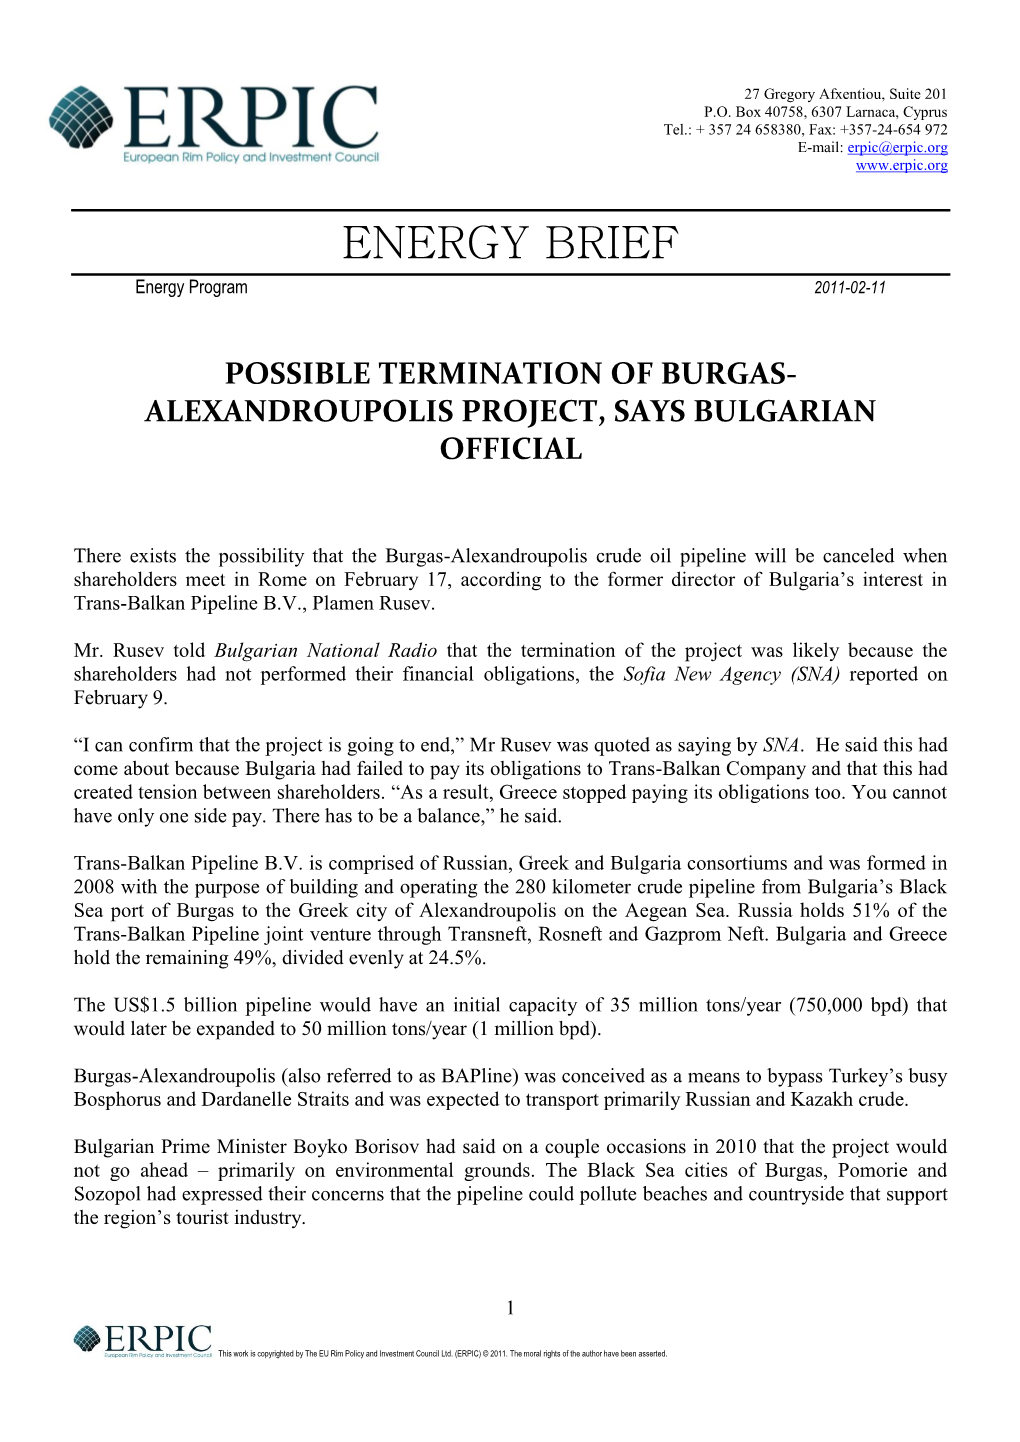 Possible Termination of Burgas-Alexadroupolis Project, Says Bulgarian Official